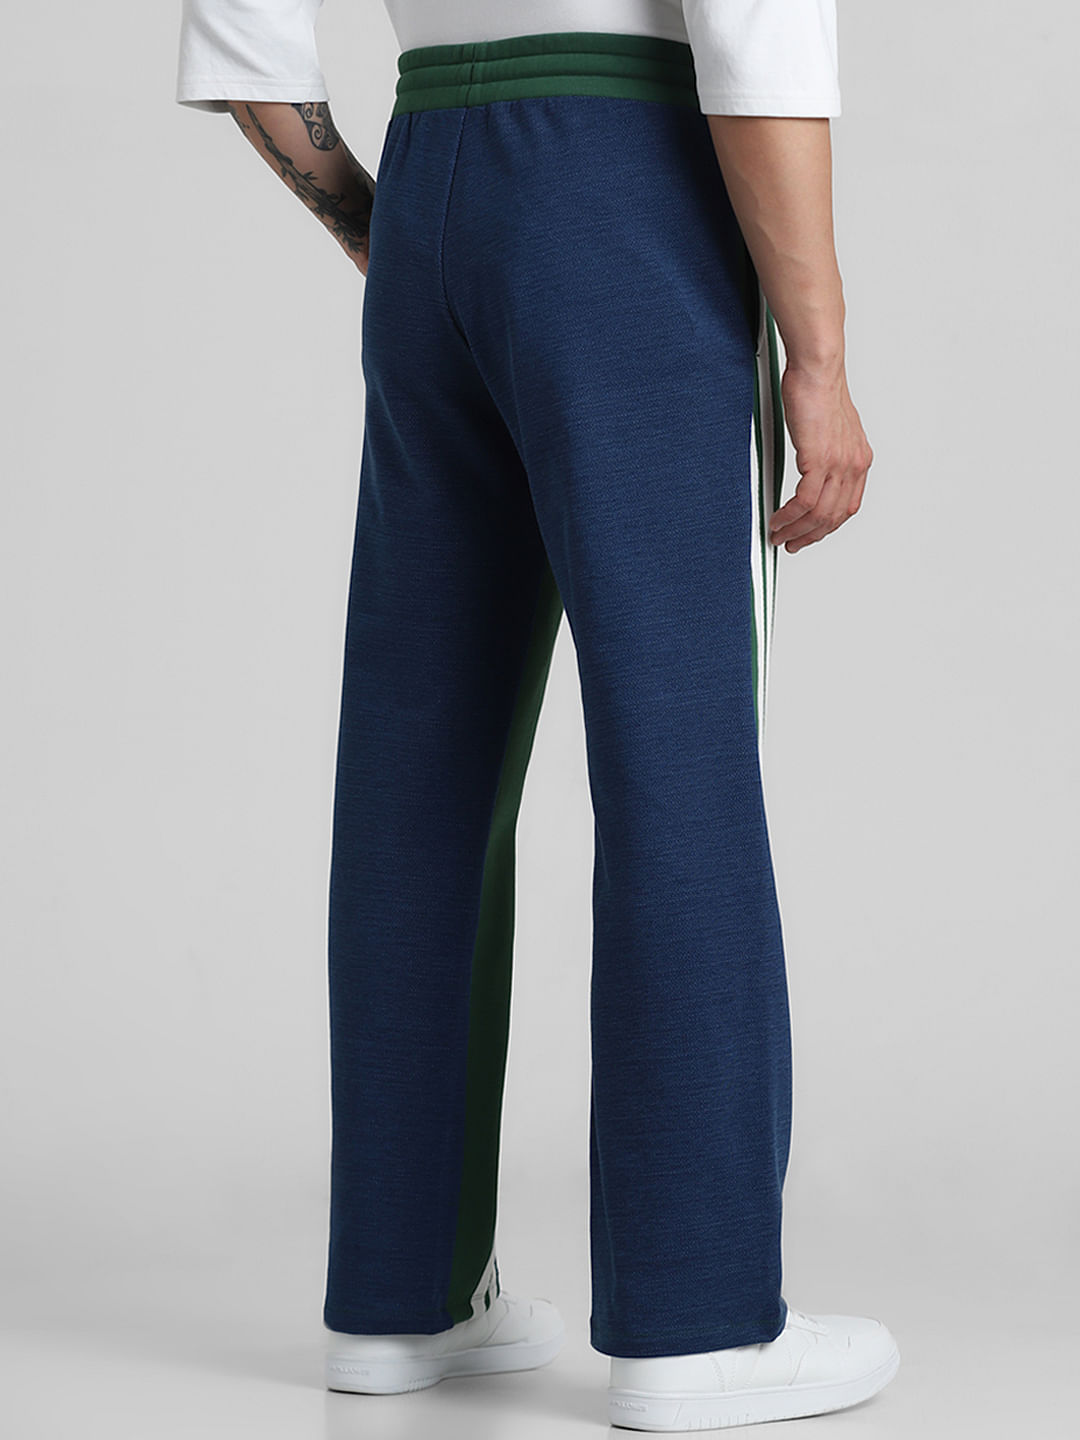 Poetic Justice Womens Mid Rise Skinny Track Pant | Hamilton Place